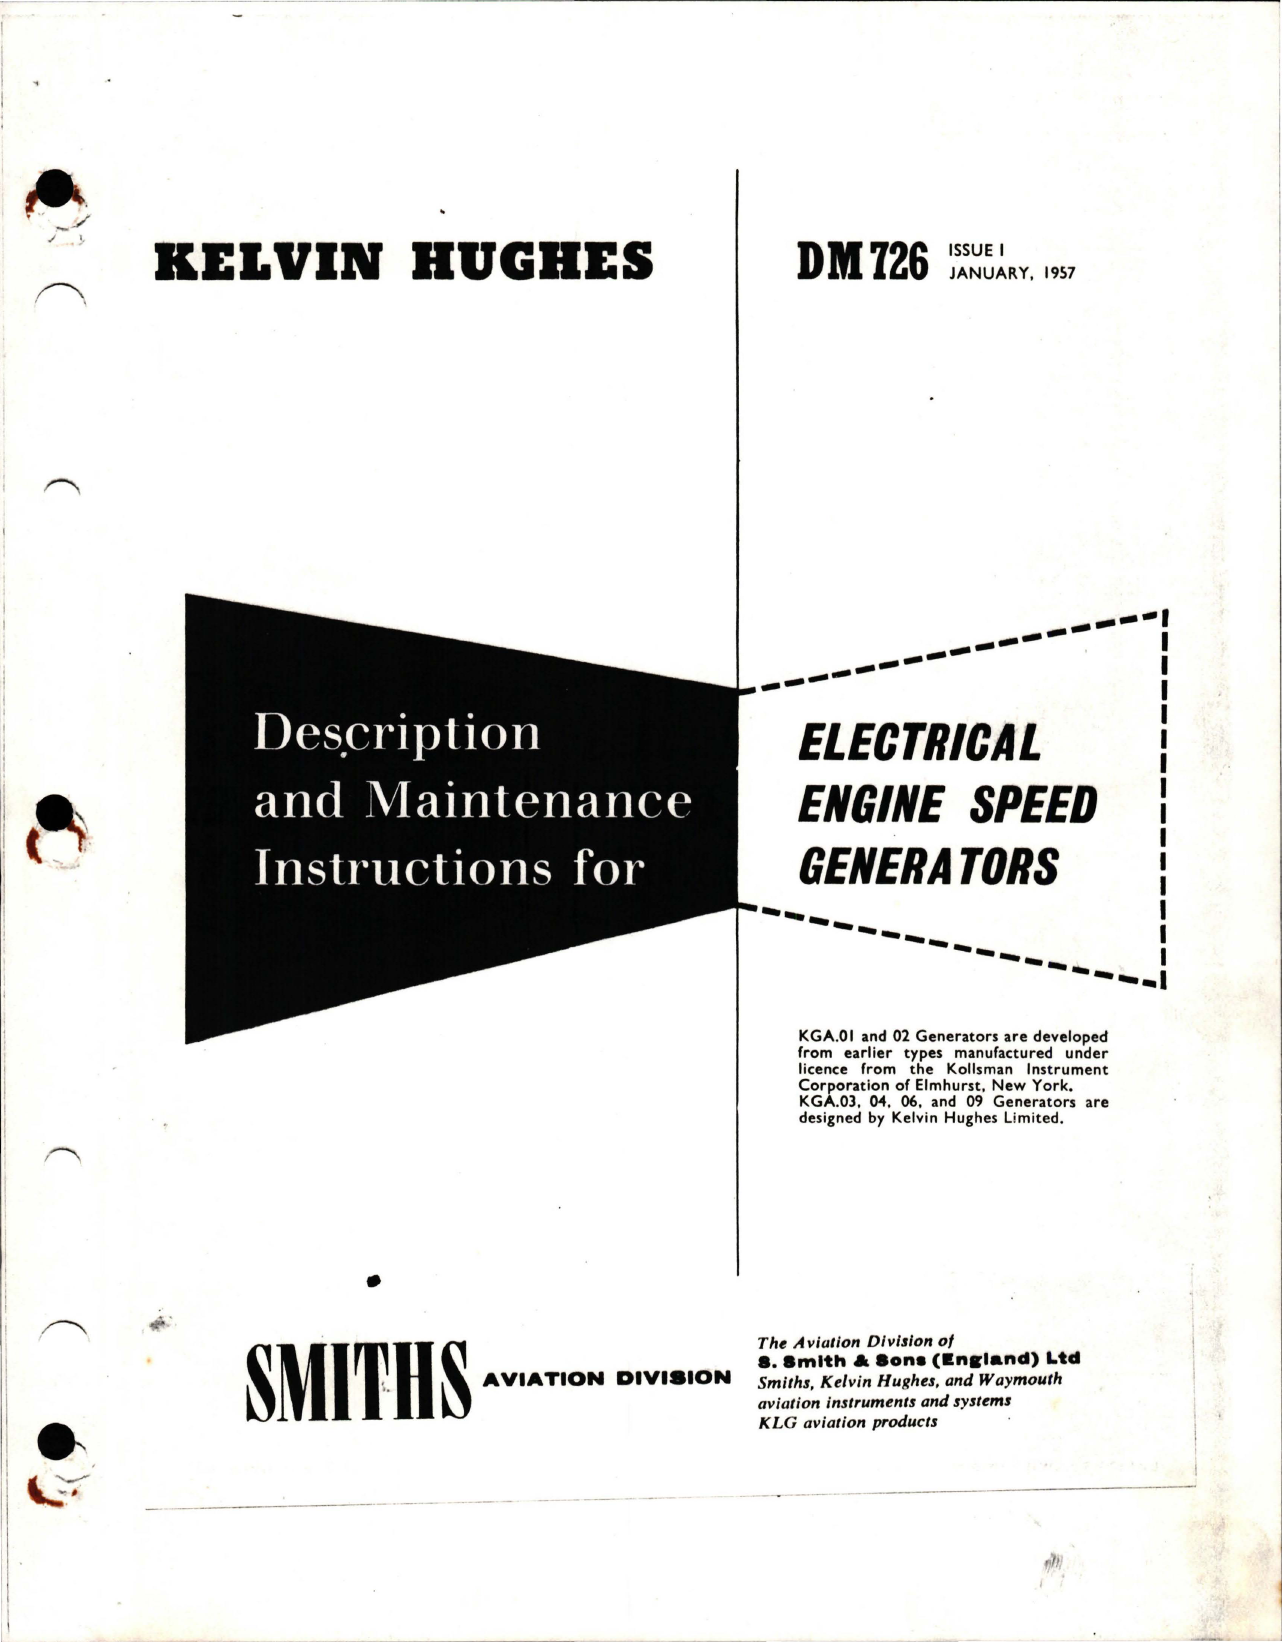 Sample page 1 from AirCorps Library document: Maintenance Instructions for Electrical Engine Speed Generators - Issue No.1